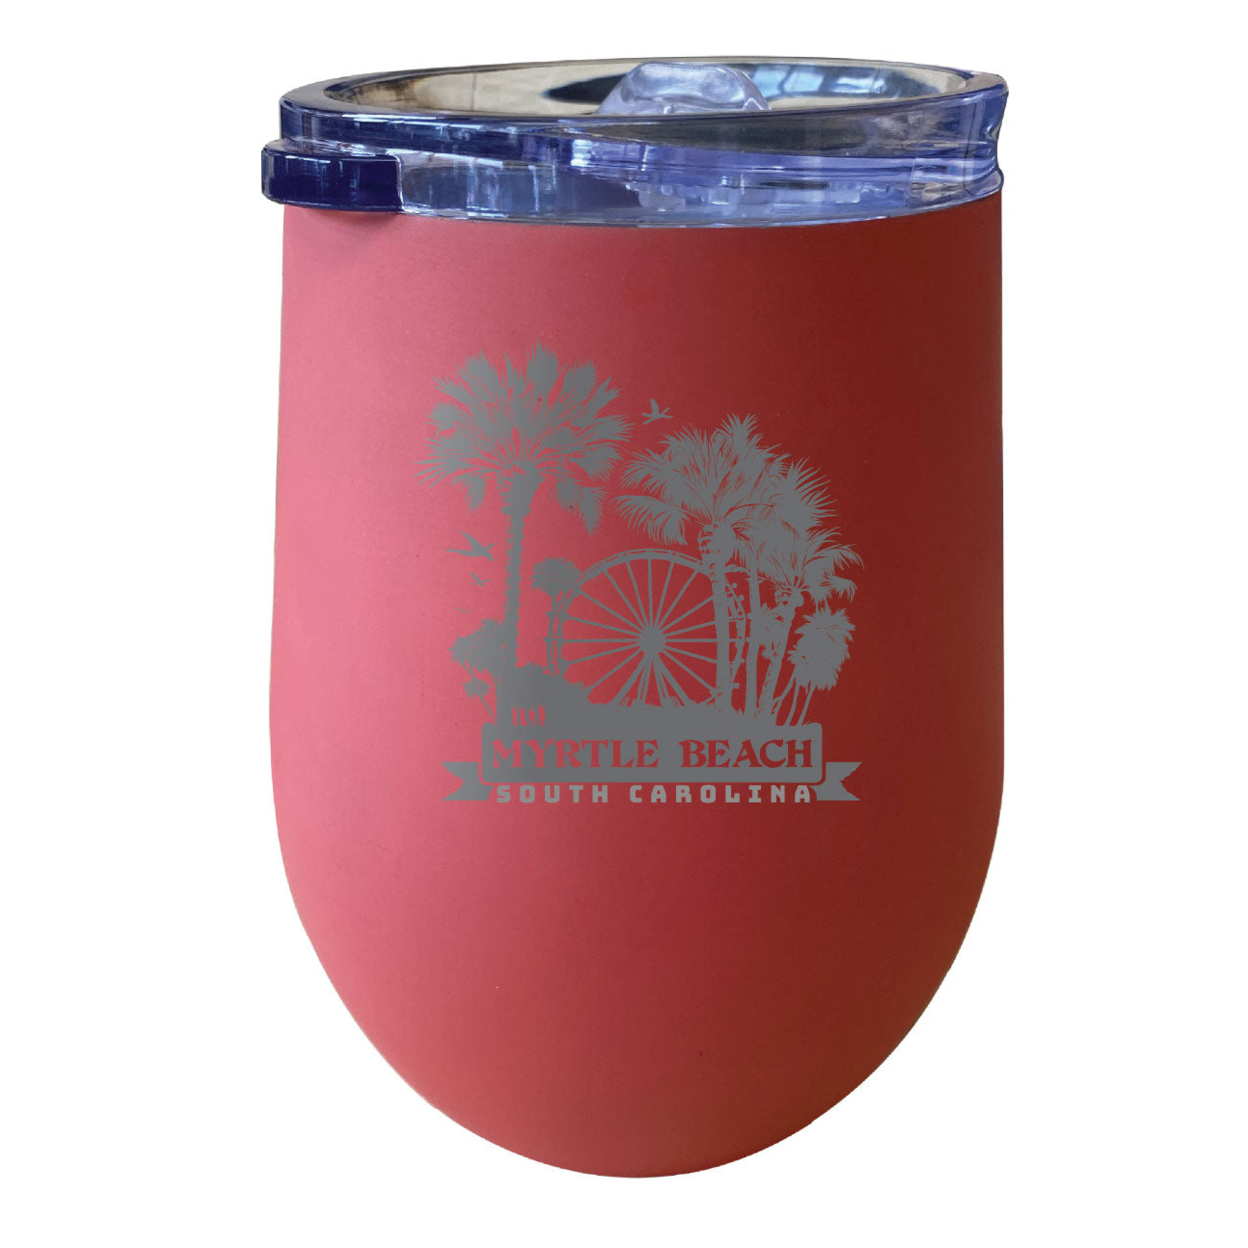 Myrtle Beach South Carolina Laser Etched Souvenir 12 Oz Insulated Wine Stainless Steel Tumbler - Navy